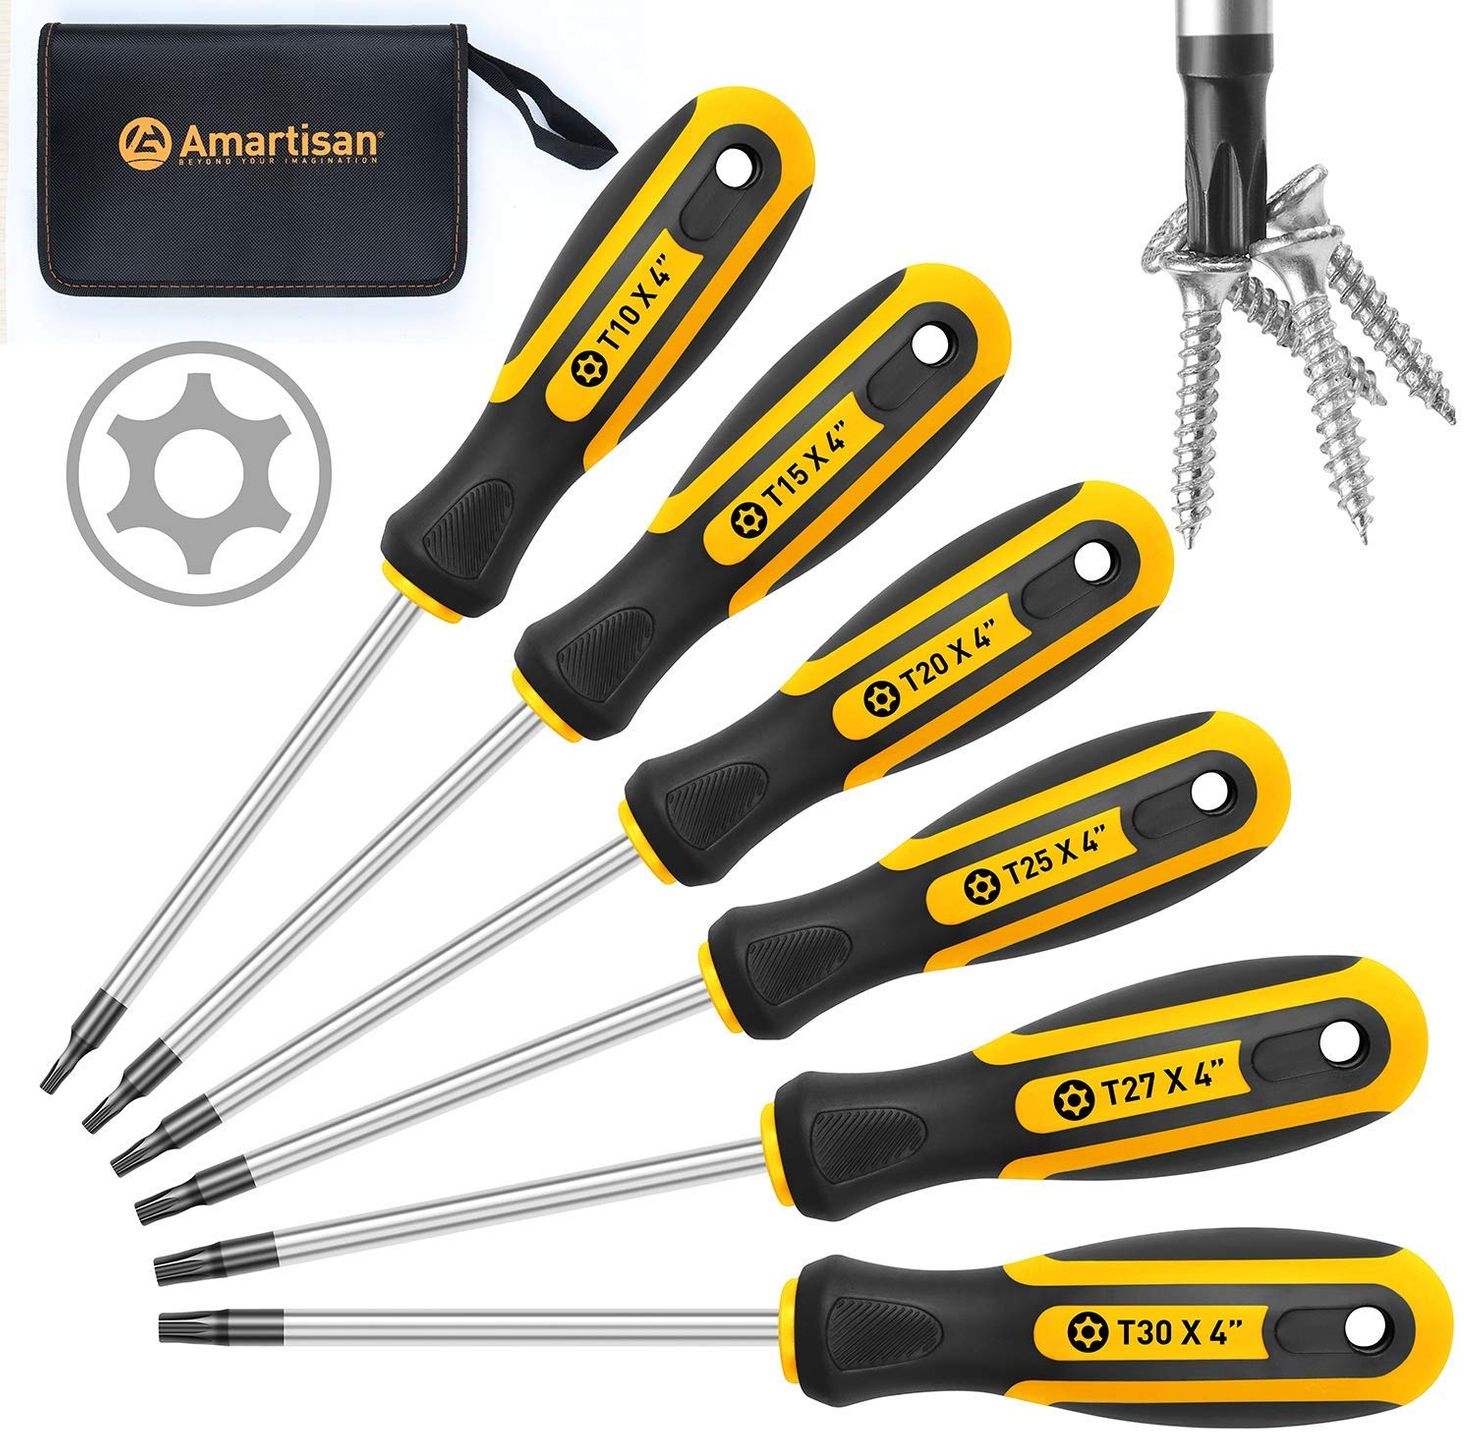 Which Types of Screwdriver Do You Actually Need? | The Strategist